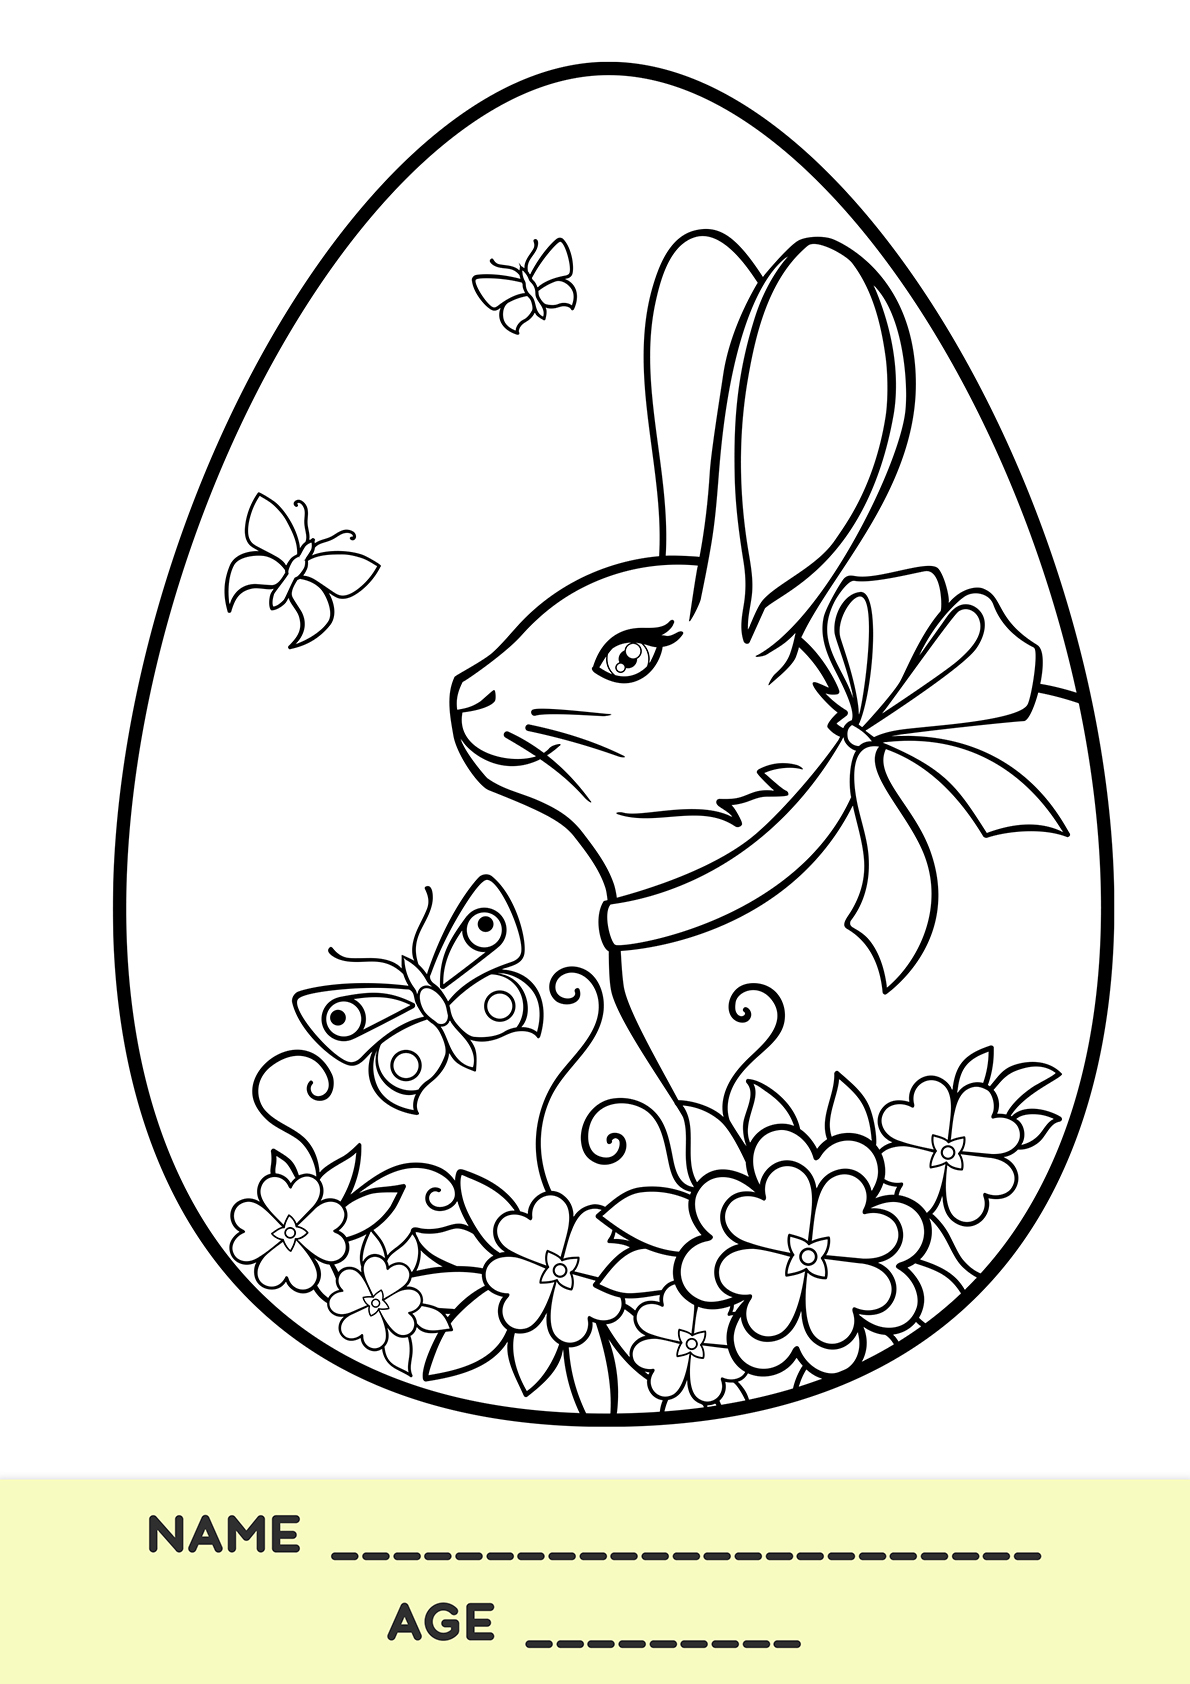 FREE Easter Colouring In for the Kids - River 949